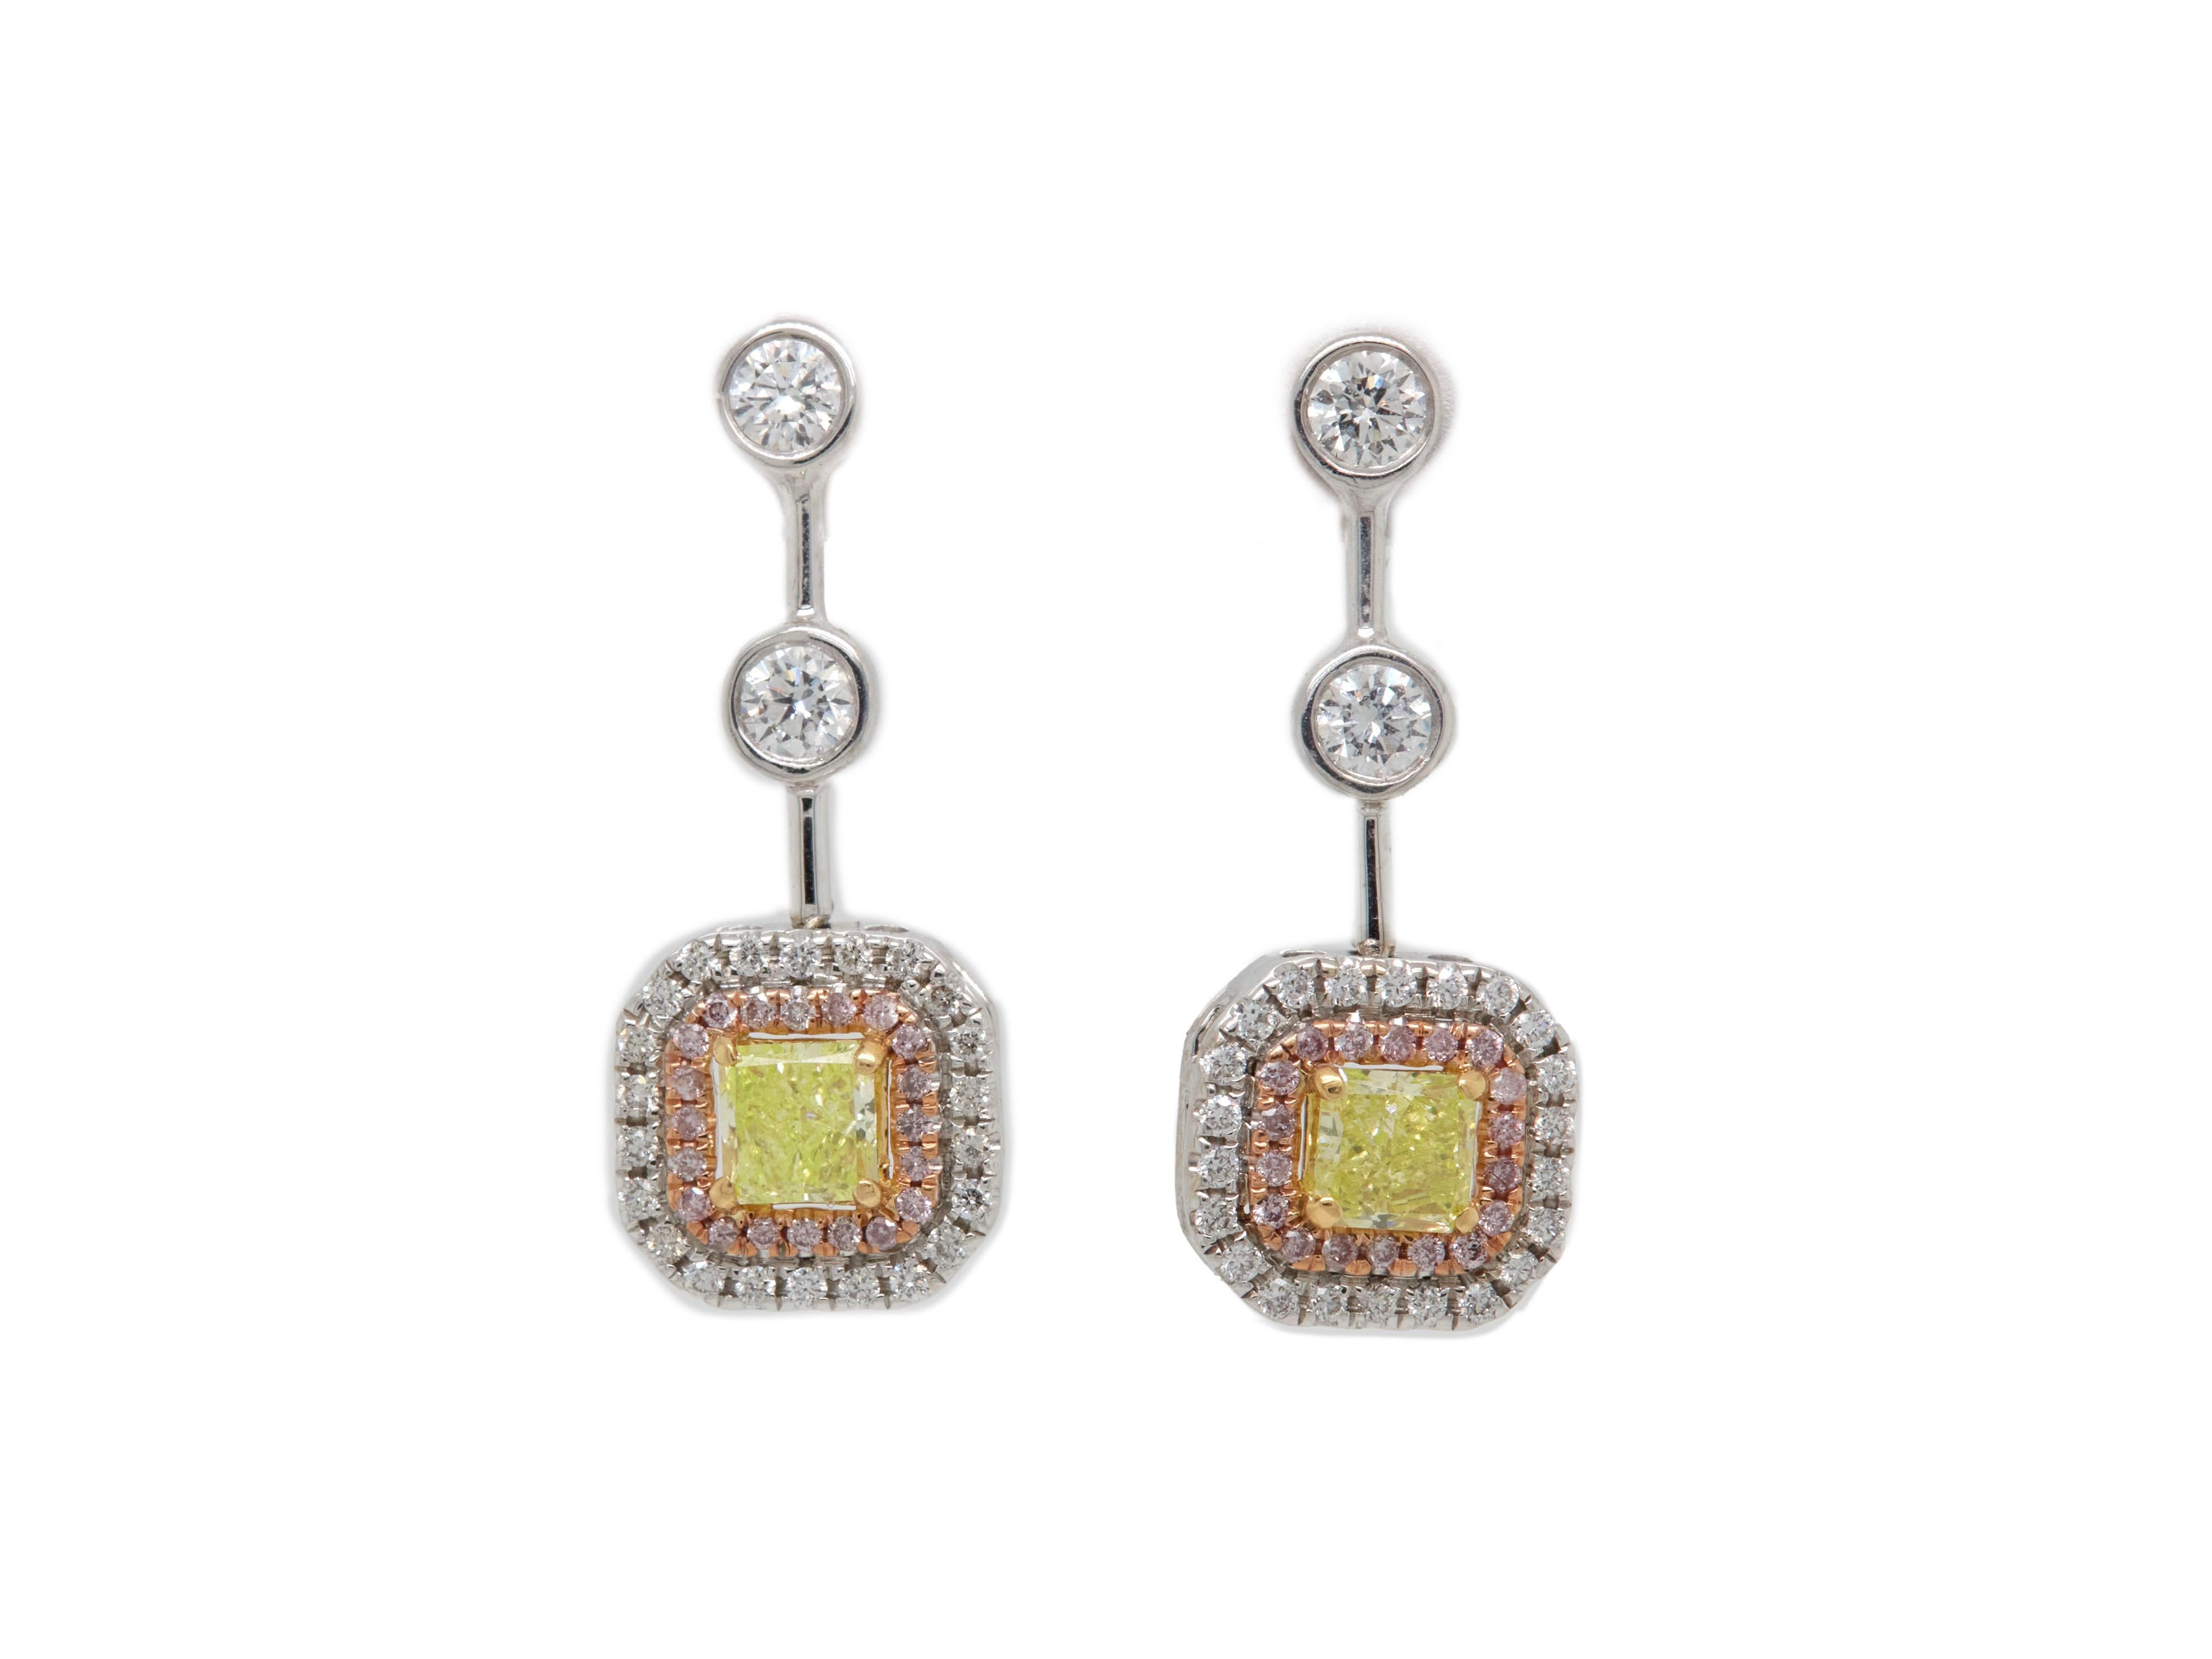 Radiant Cut 0.76 Carat Green-Yellow Diamond Drop Earrings with Pink Diamond Halo, GIA Report For Sale